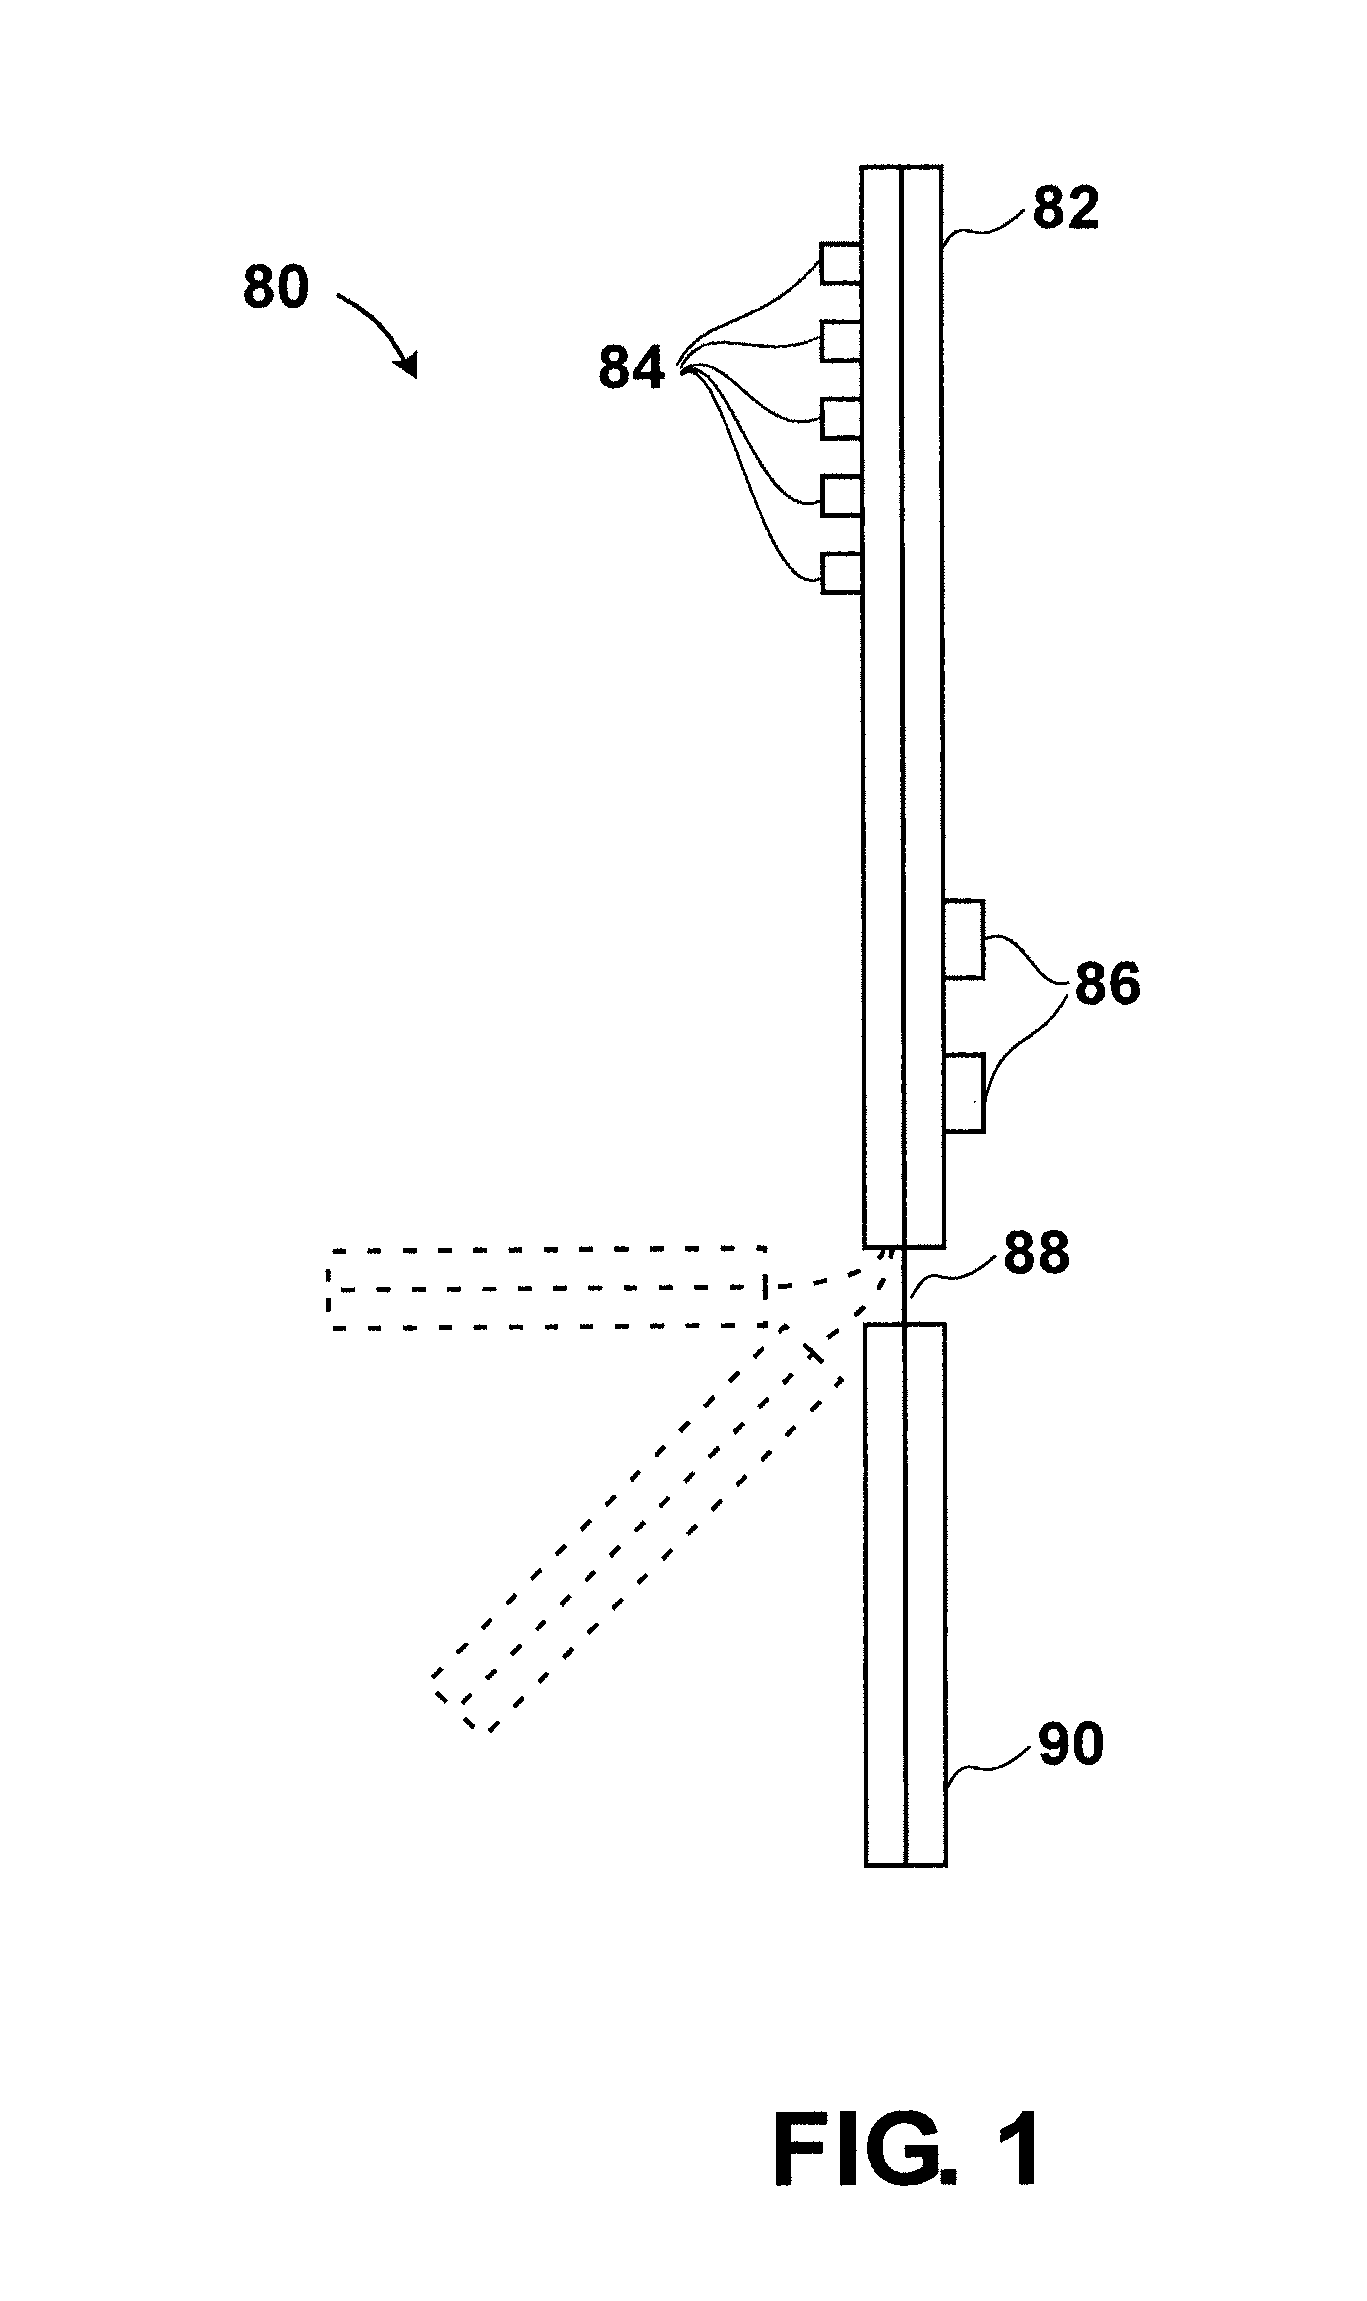 Apparatus for a low-cost semiconductor test interface system